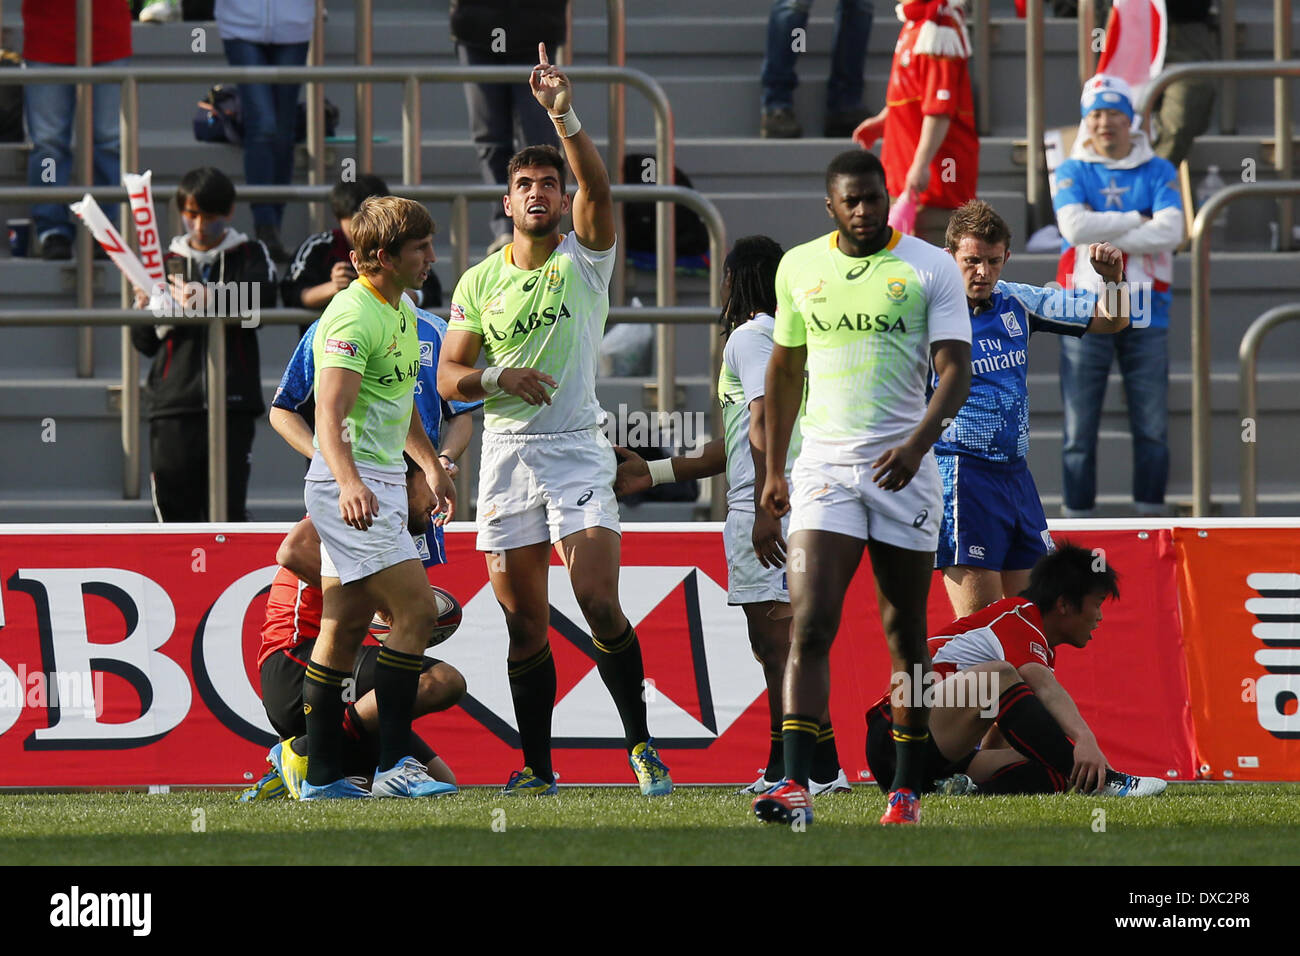 Tokyo, Giappone. 22 Mar, 2014. Team Sud Africa Rugby gruppo : 2013-14 IRB Sevens World Series, Tokyo Sevens 2014, piscina stadio match tra Giappone 533 Sud Africa al Prince Chichibu Memorial Stadium a Tokyo in Giappone . © AFLO SPORT/Alamy Live News Foto Stock